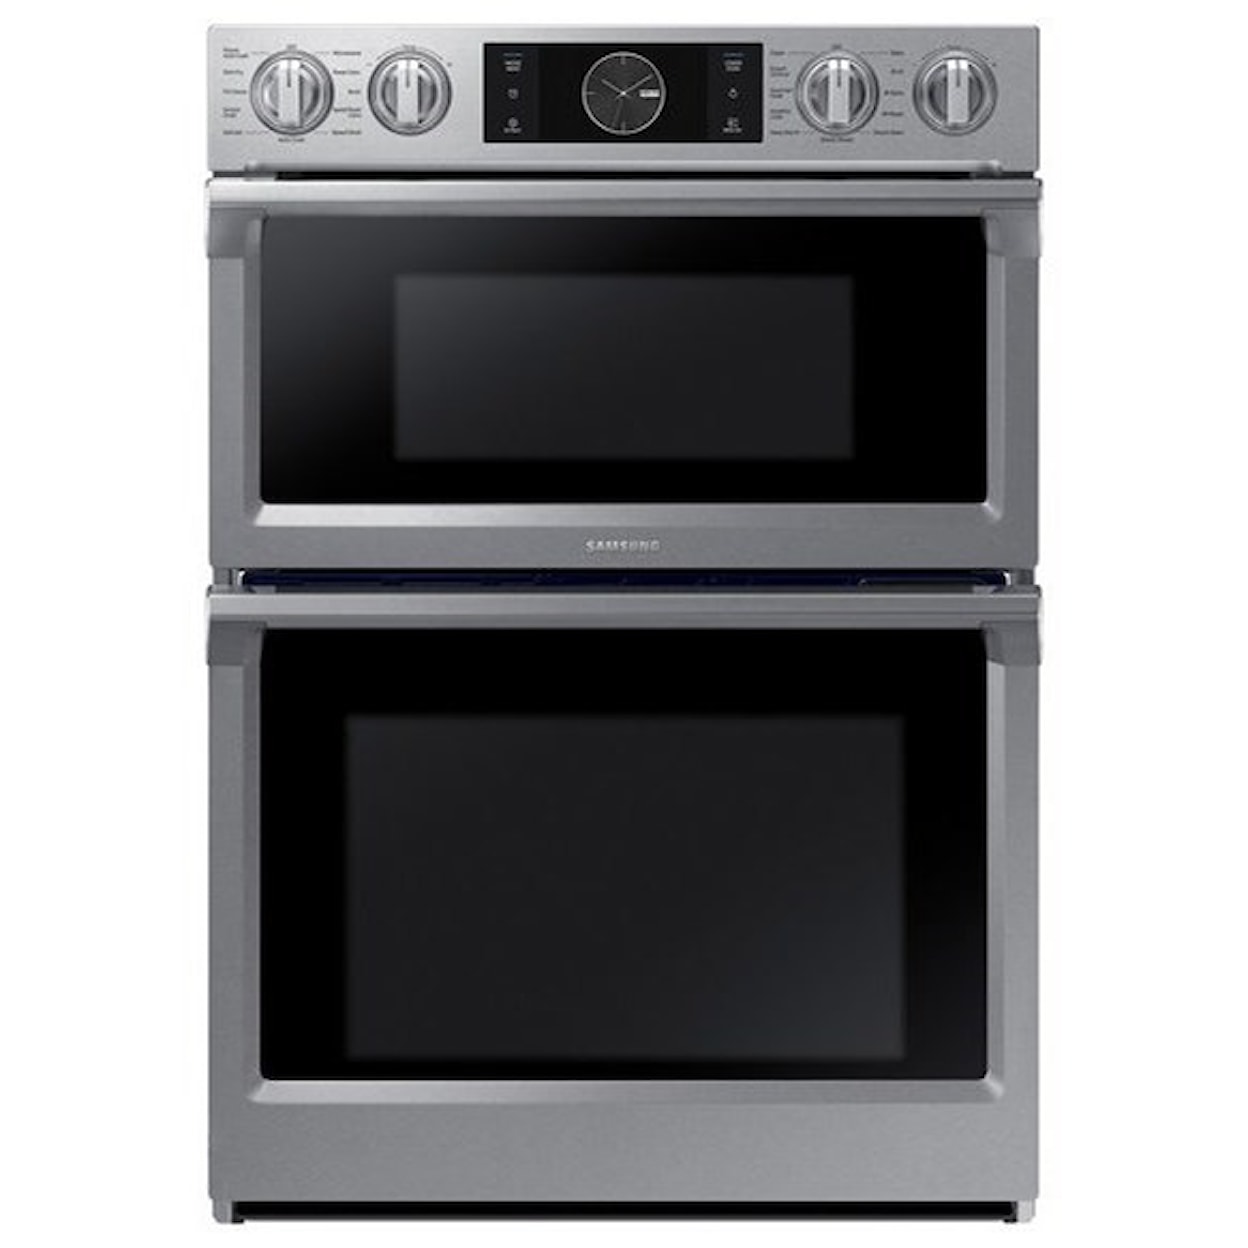 Samsung Appliances Double Wall Ovens - Samsung 30” Microwave Combination Wall Oven